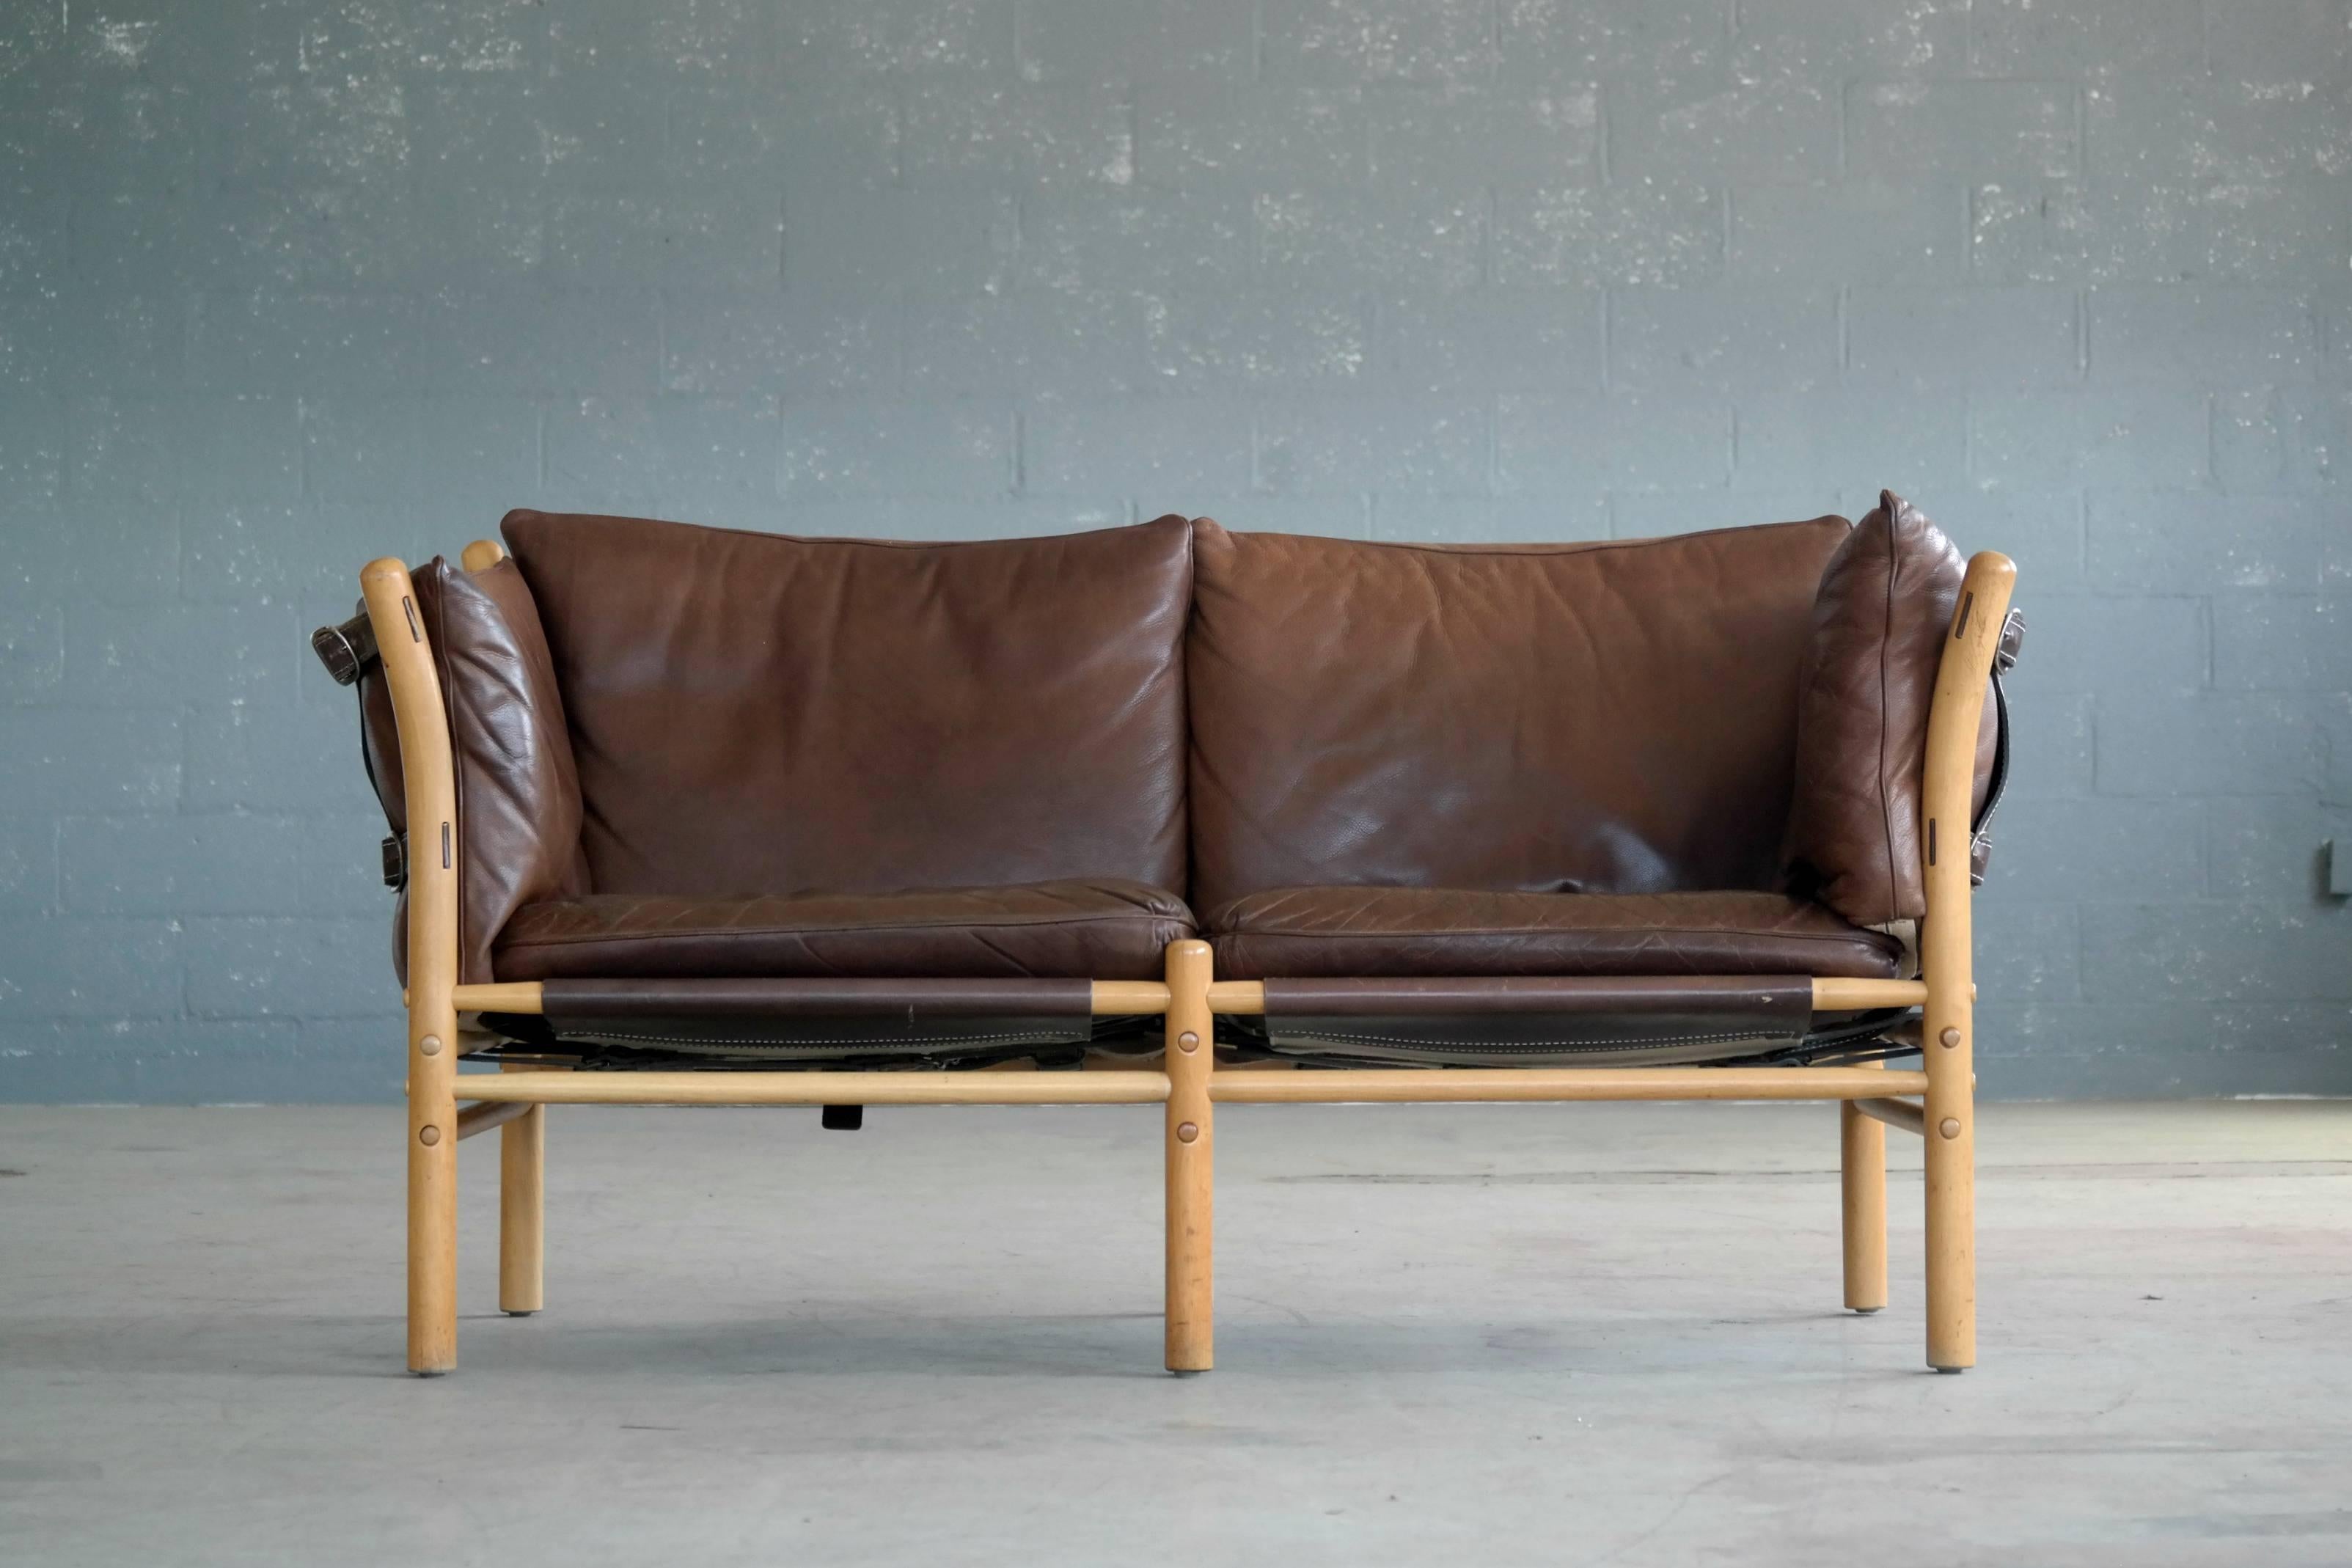 Beautiful 1960s safari-style sofa by Arne Norell in beech and leather. The leather has patinated to a deep cognac leather which stands in perfect contrast to the blond beechwood frame. A little bit of crazing to one of the seat cushions but great